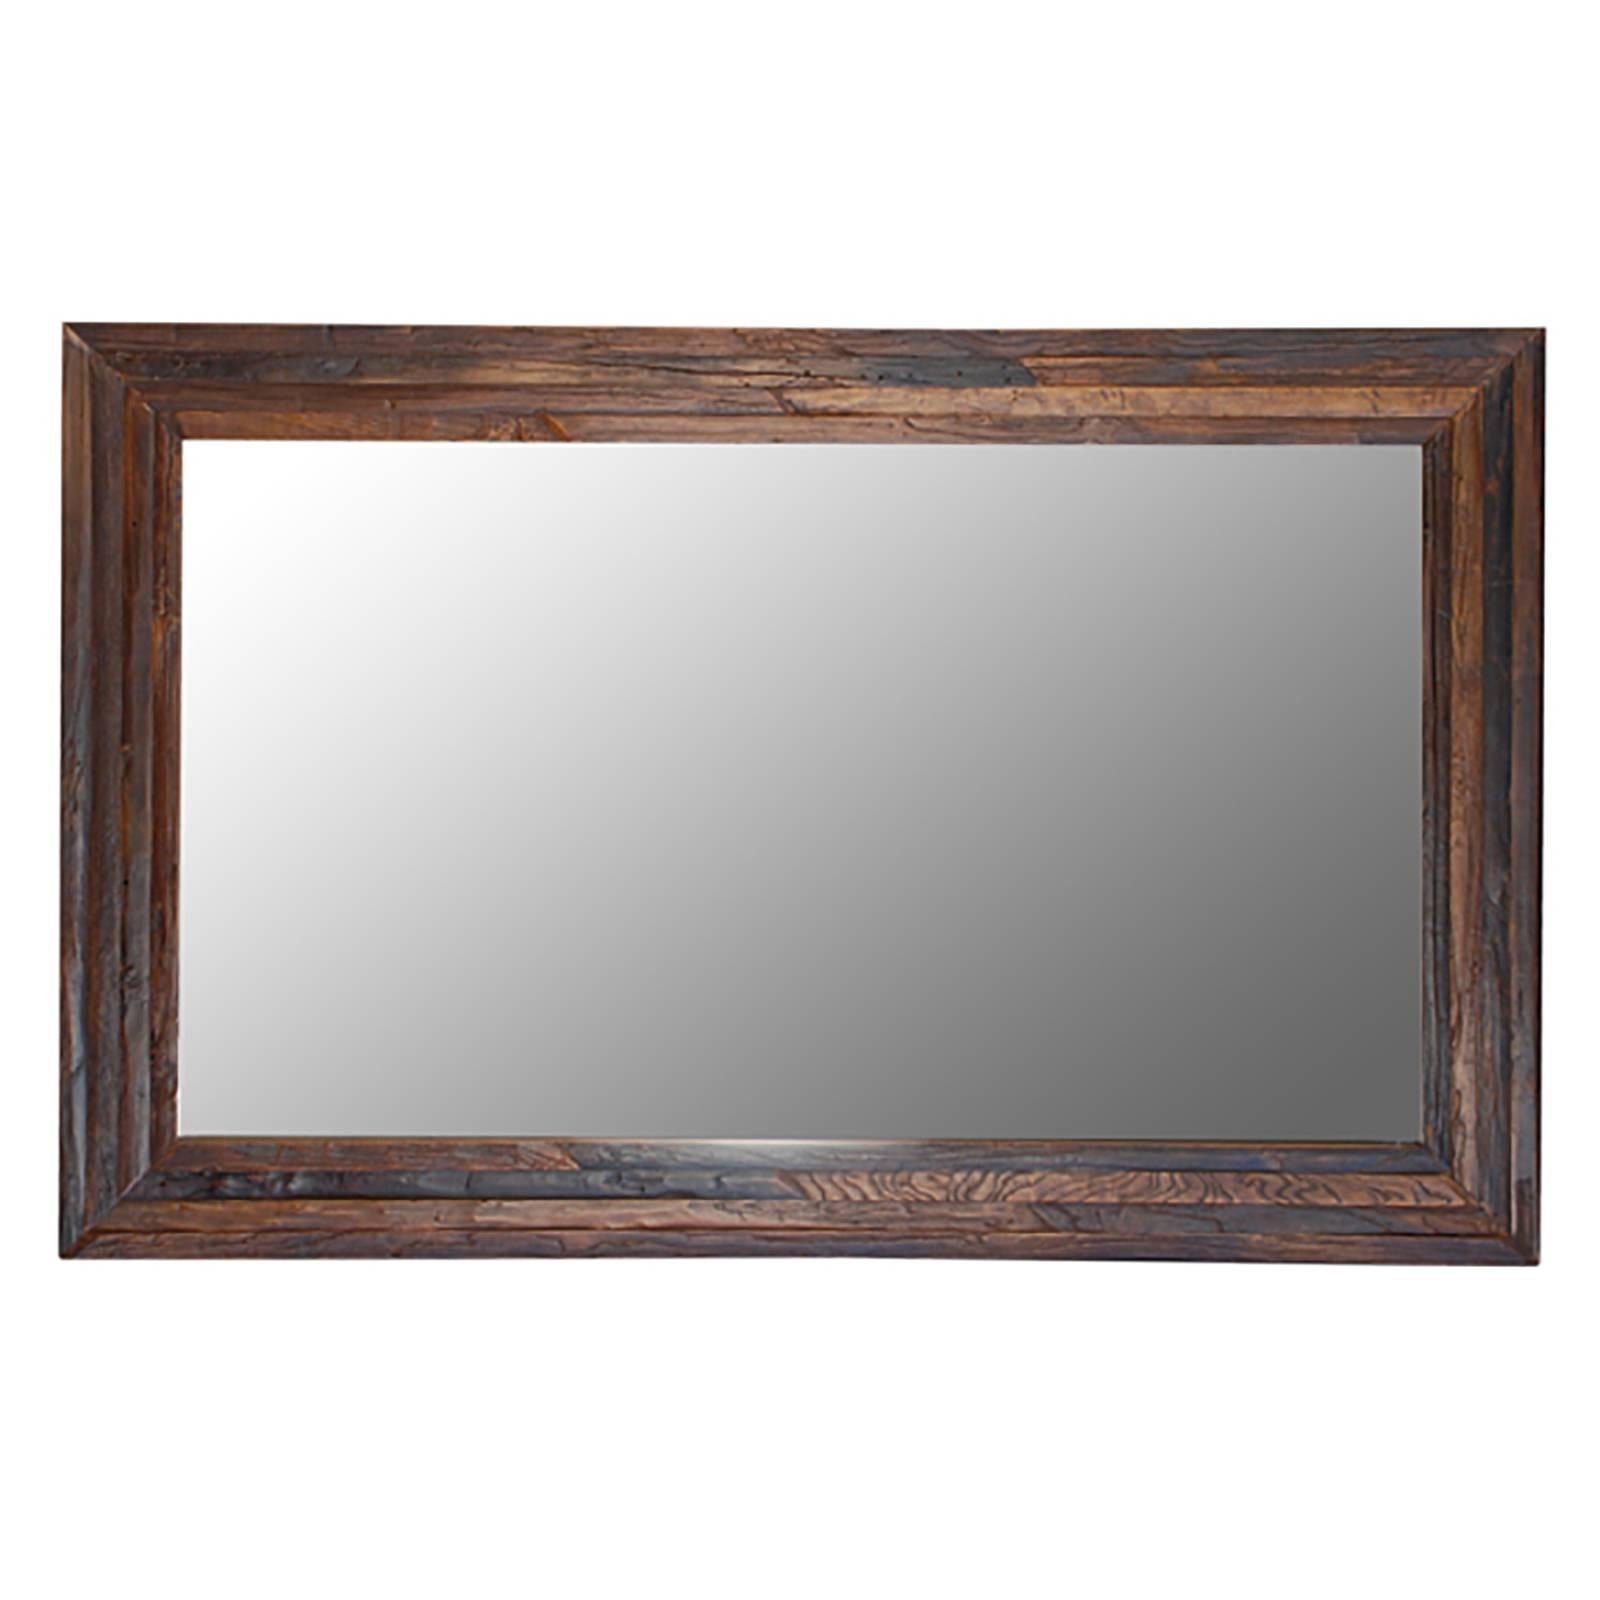 Paying homage to 19th century framed signs of honor presented to respected locals, the frame of this mirror is of monumental scale. It is handcrafted from thick planks of reclaimed elm from centuries old buildings in China. It bears the patina of